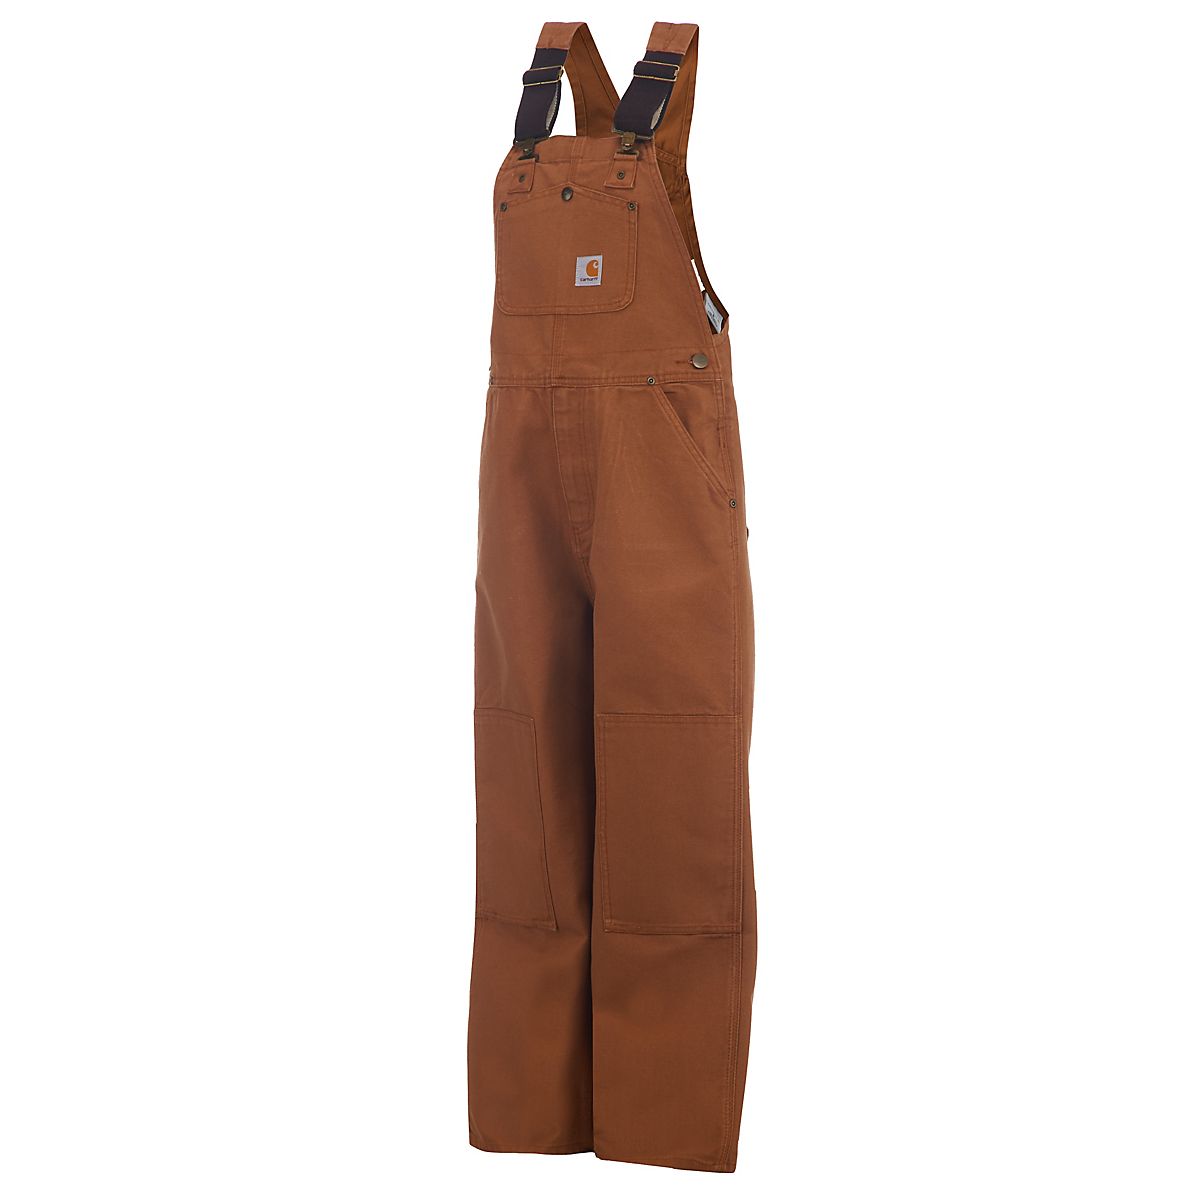 Carhartt Boys' Duck Washed Bib Overall | Free Shipping at Academy